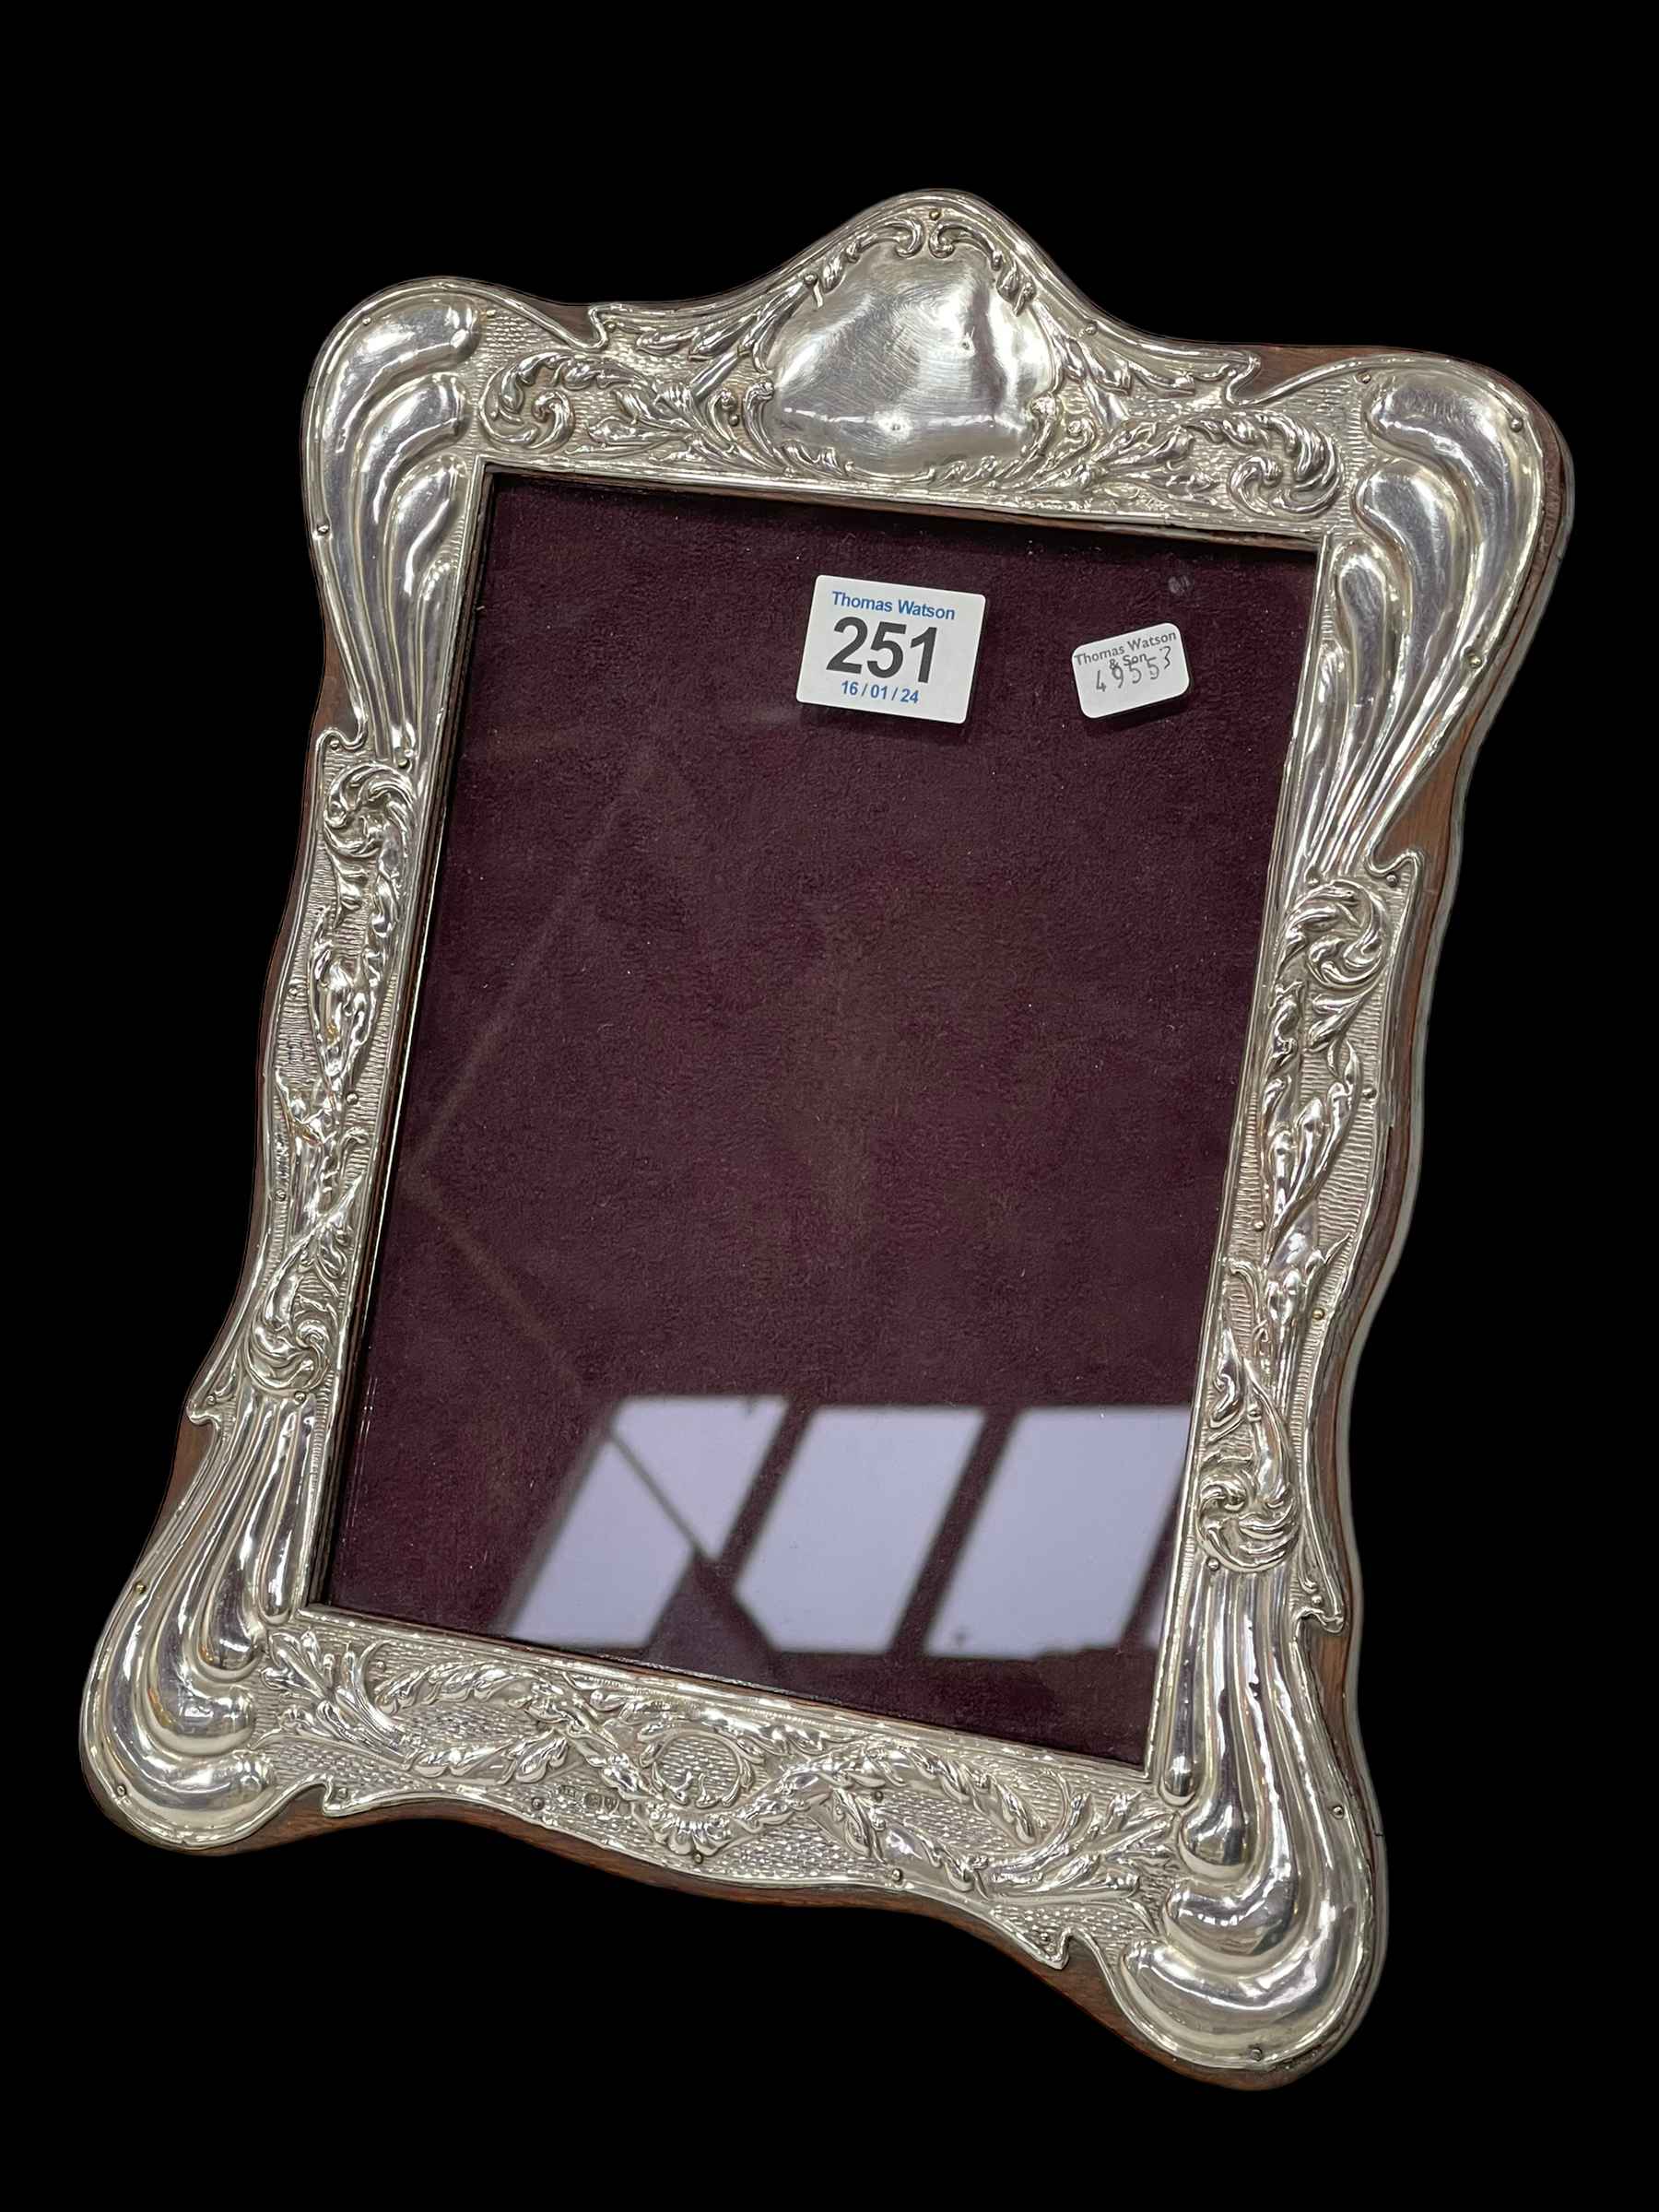 Chester hallmarked silver easel photograph frame in Art Nouveau taste, 1912, 31cm by 23cm.